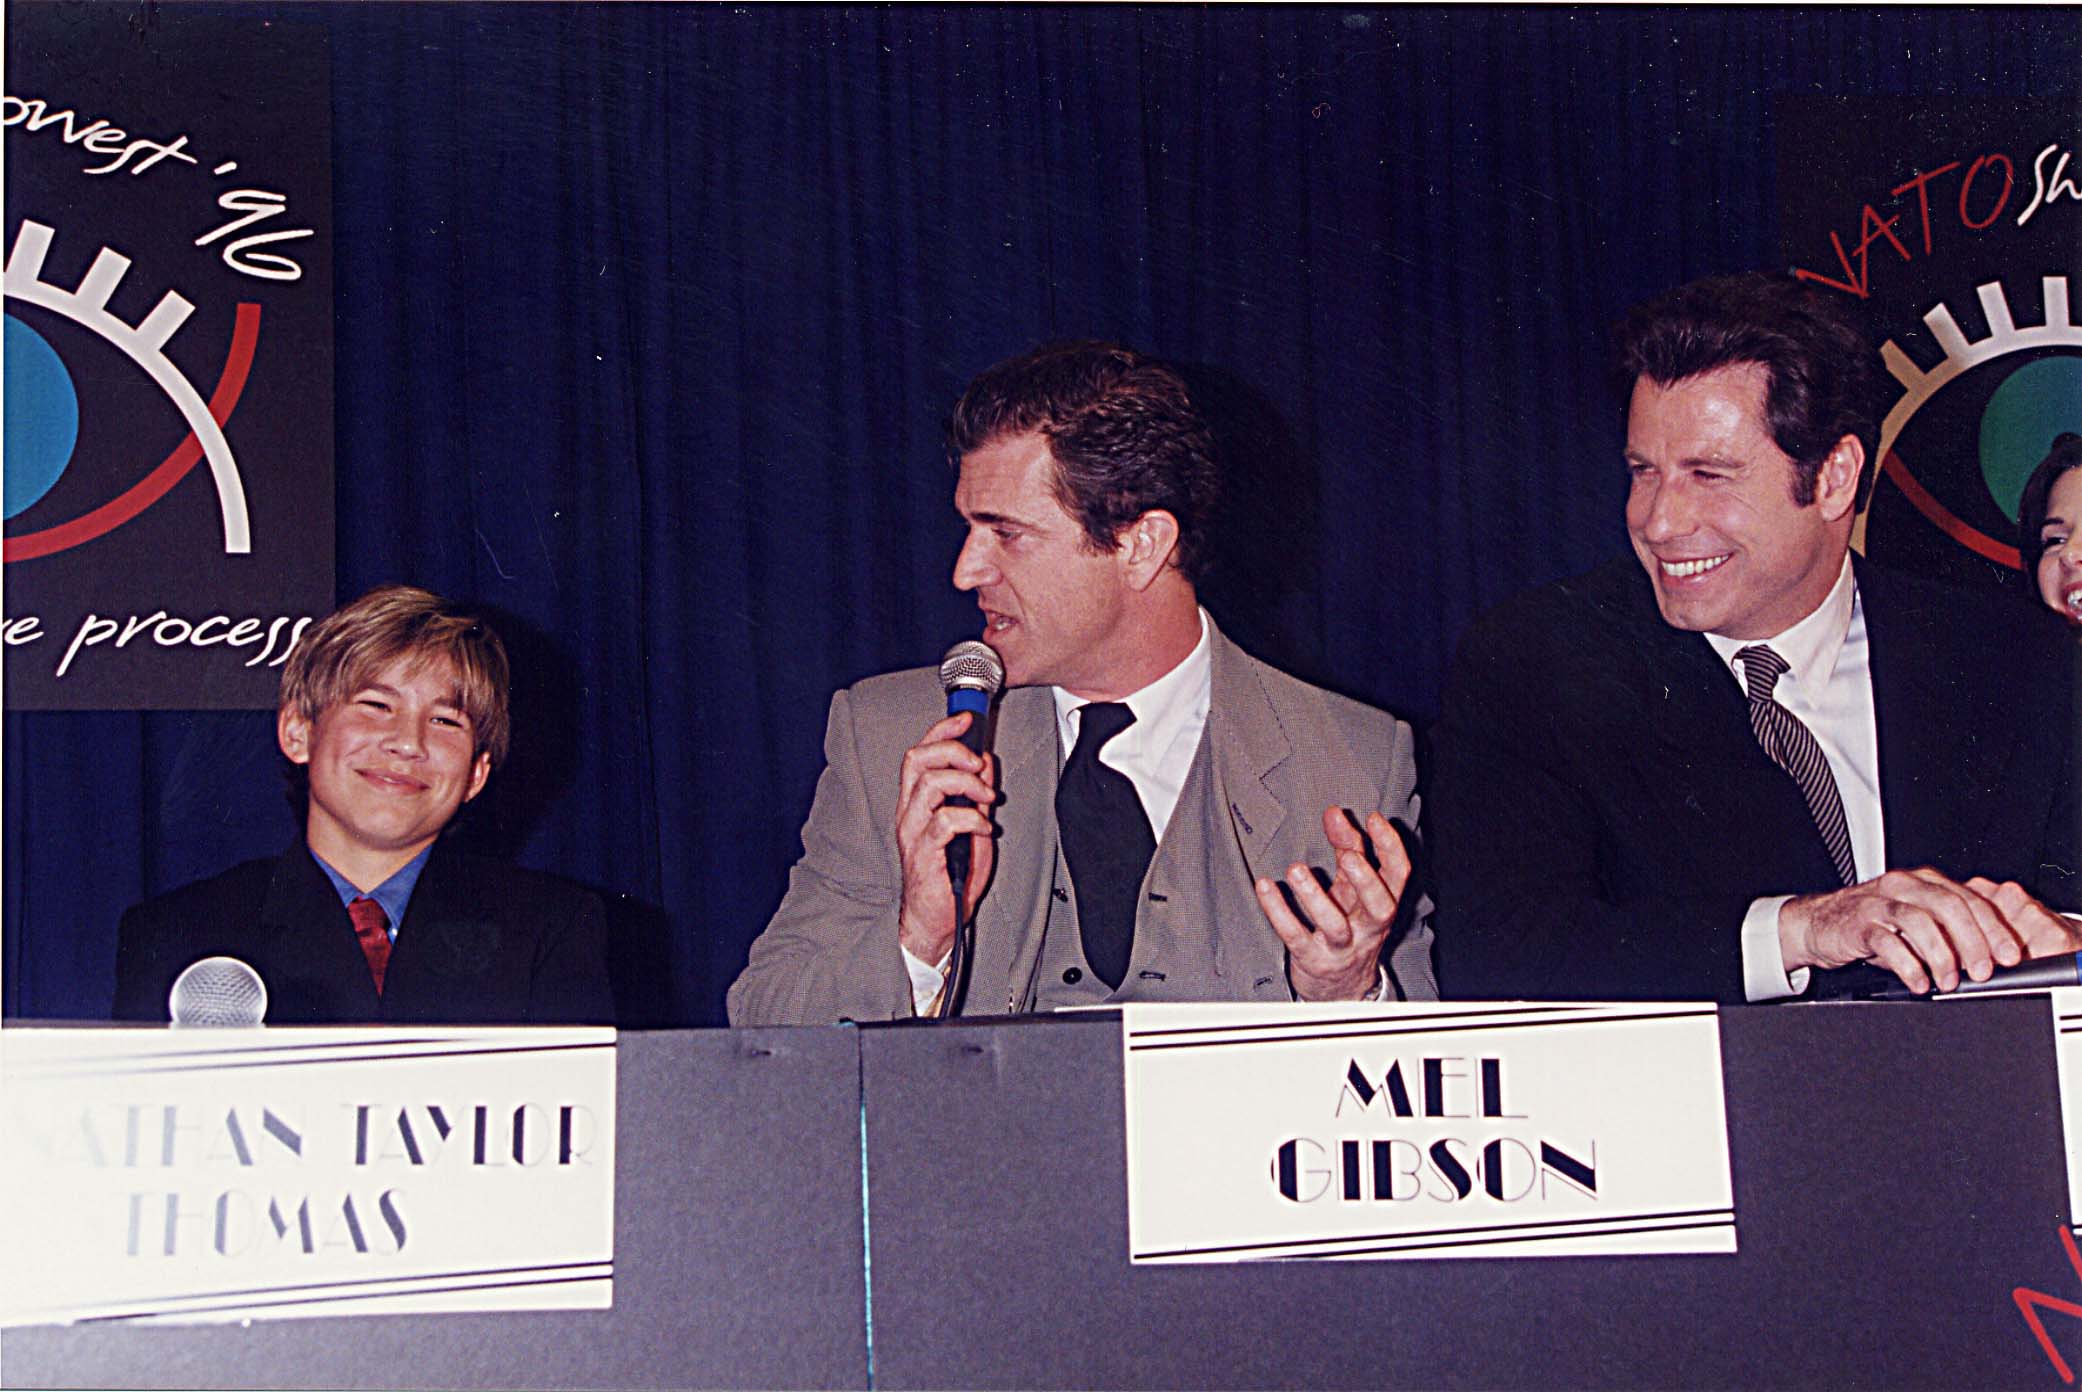 Jonathan Taylor Thomas, Mel Gibson & John Travolta during ShoWest '96 in Las Vegas, Nevada, United States. | Source: Getty Images